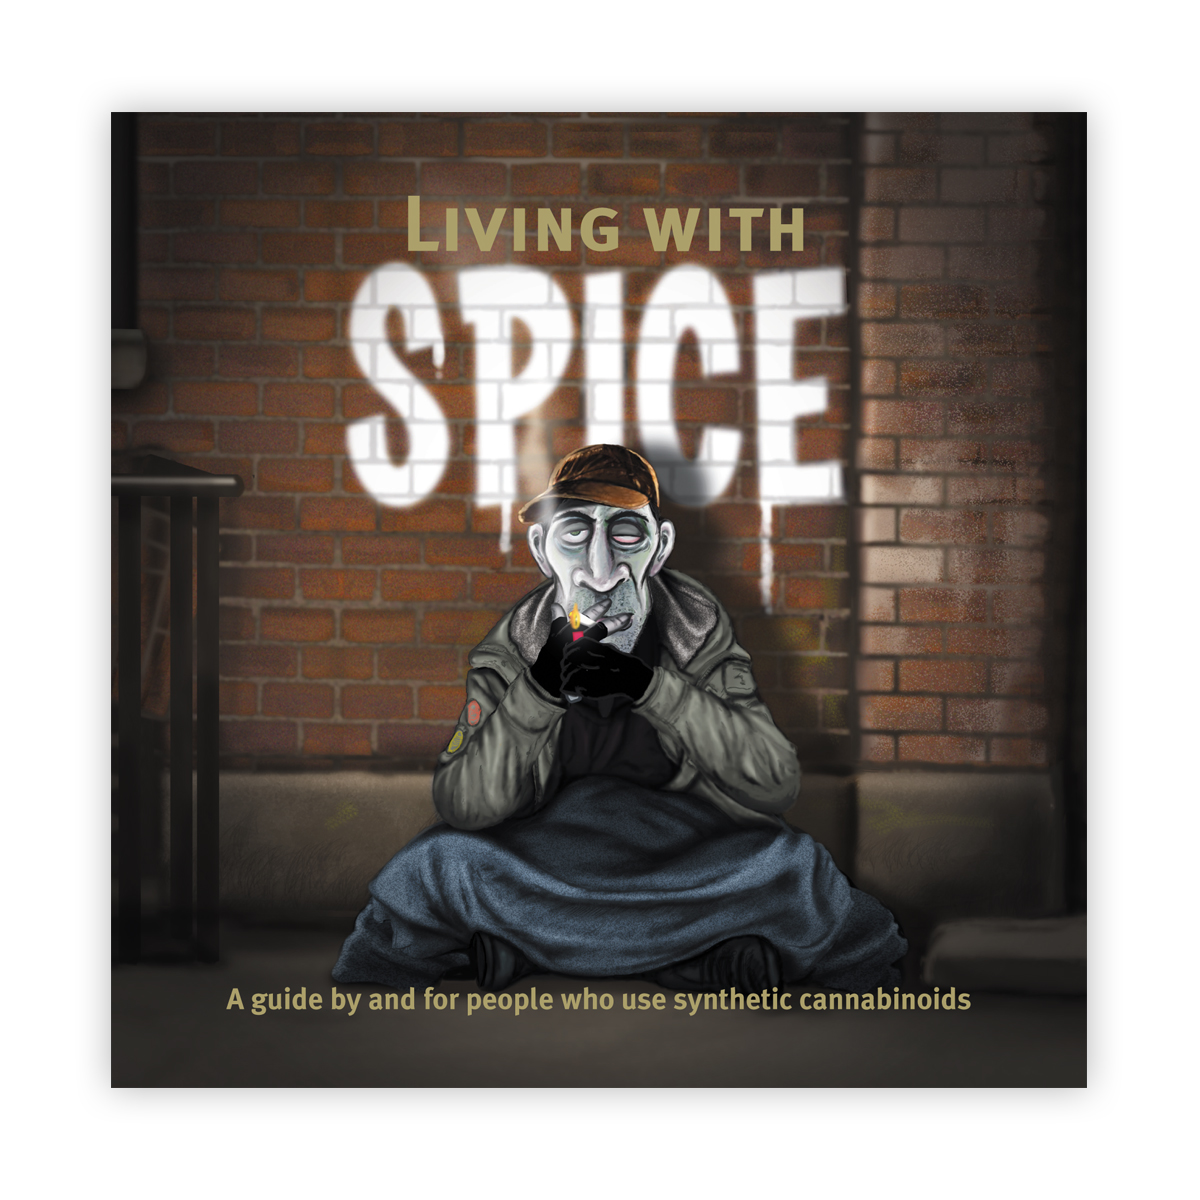 Living with spice